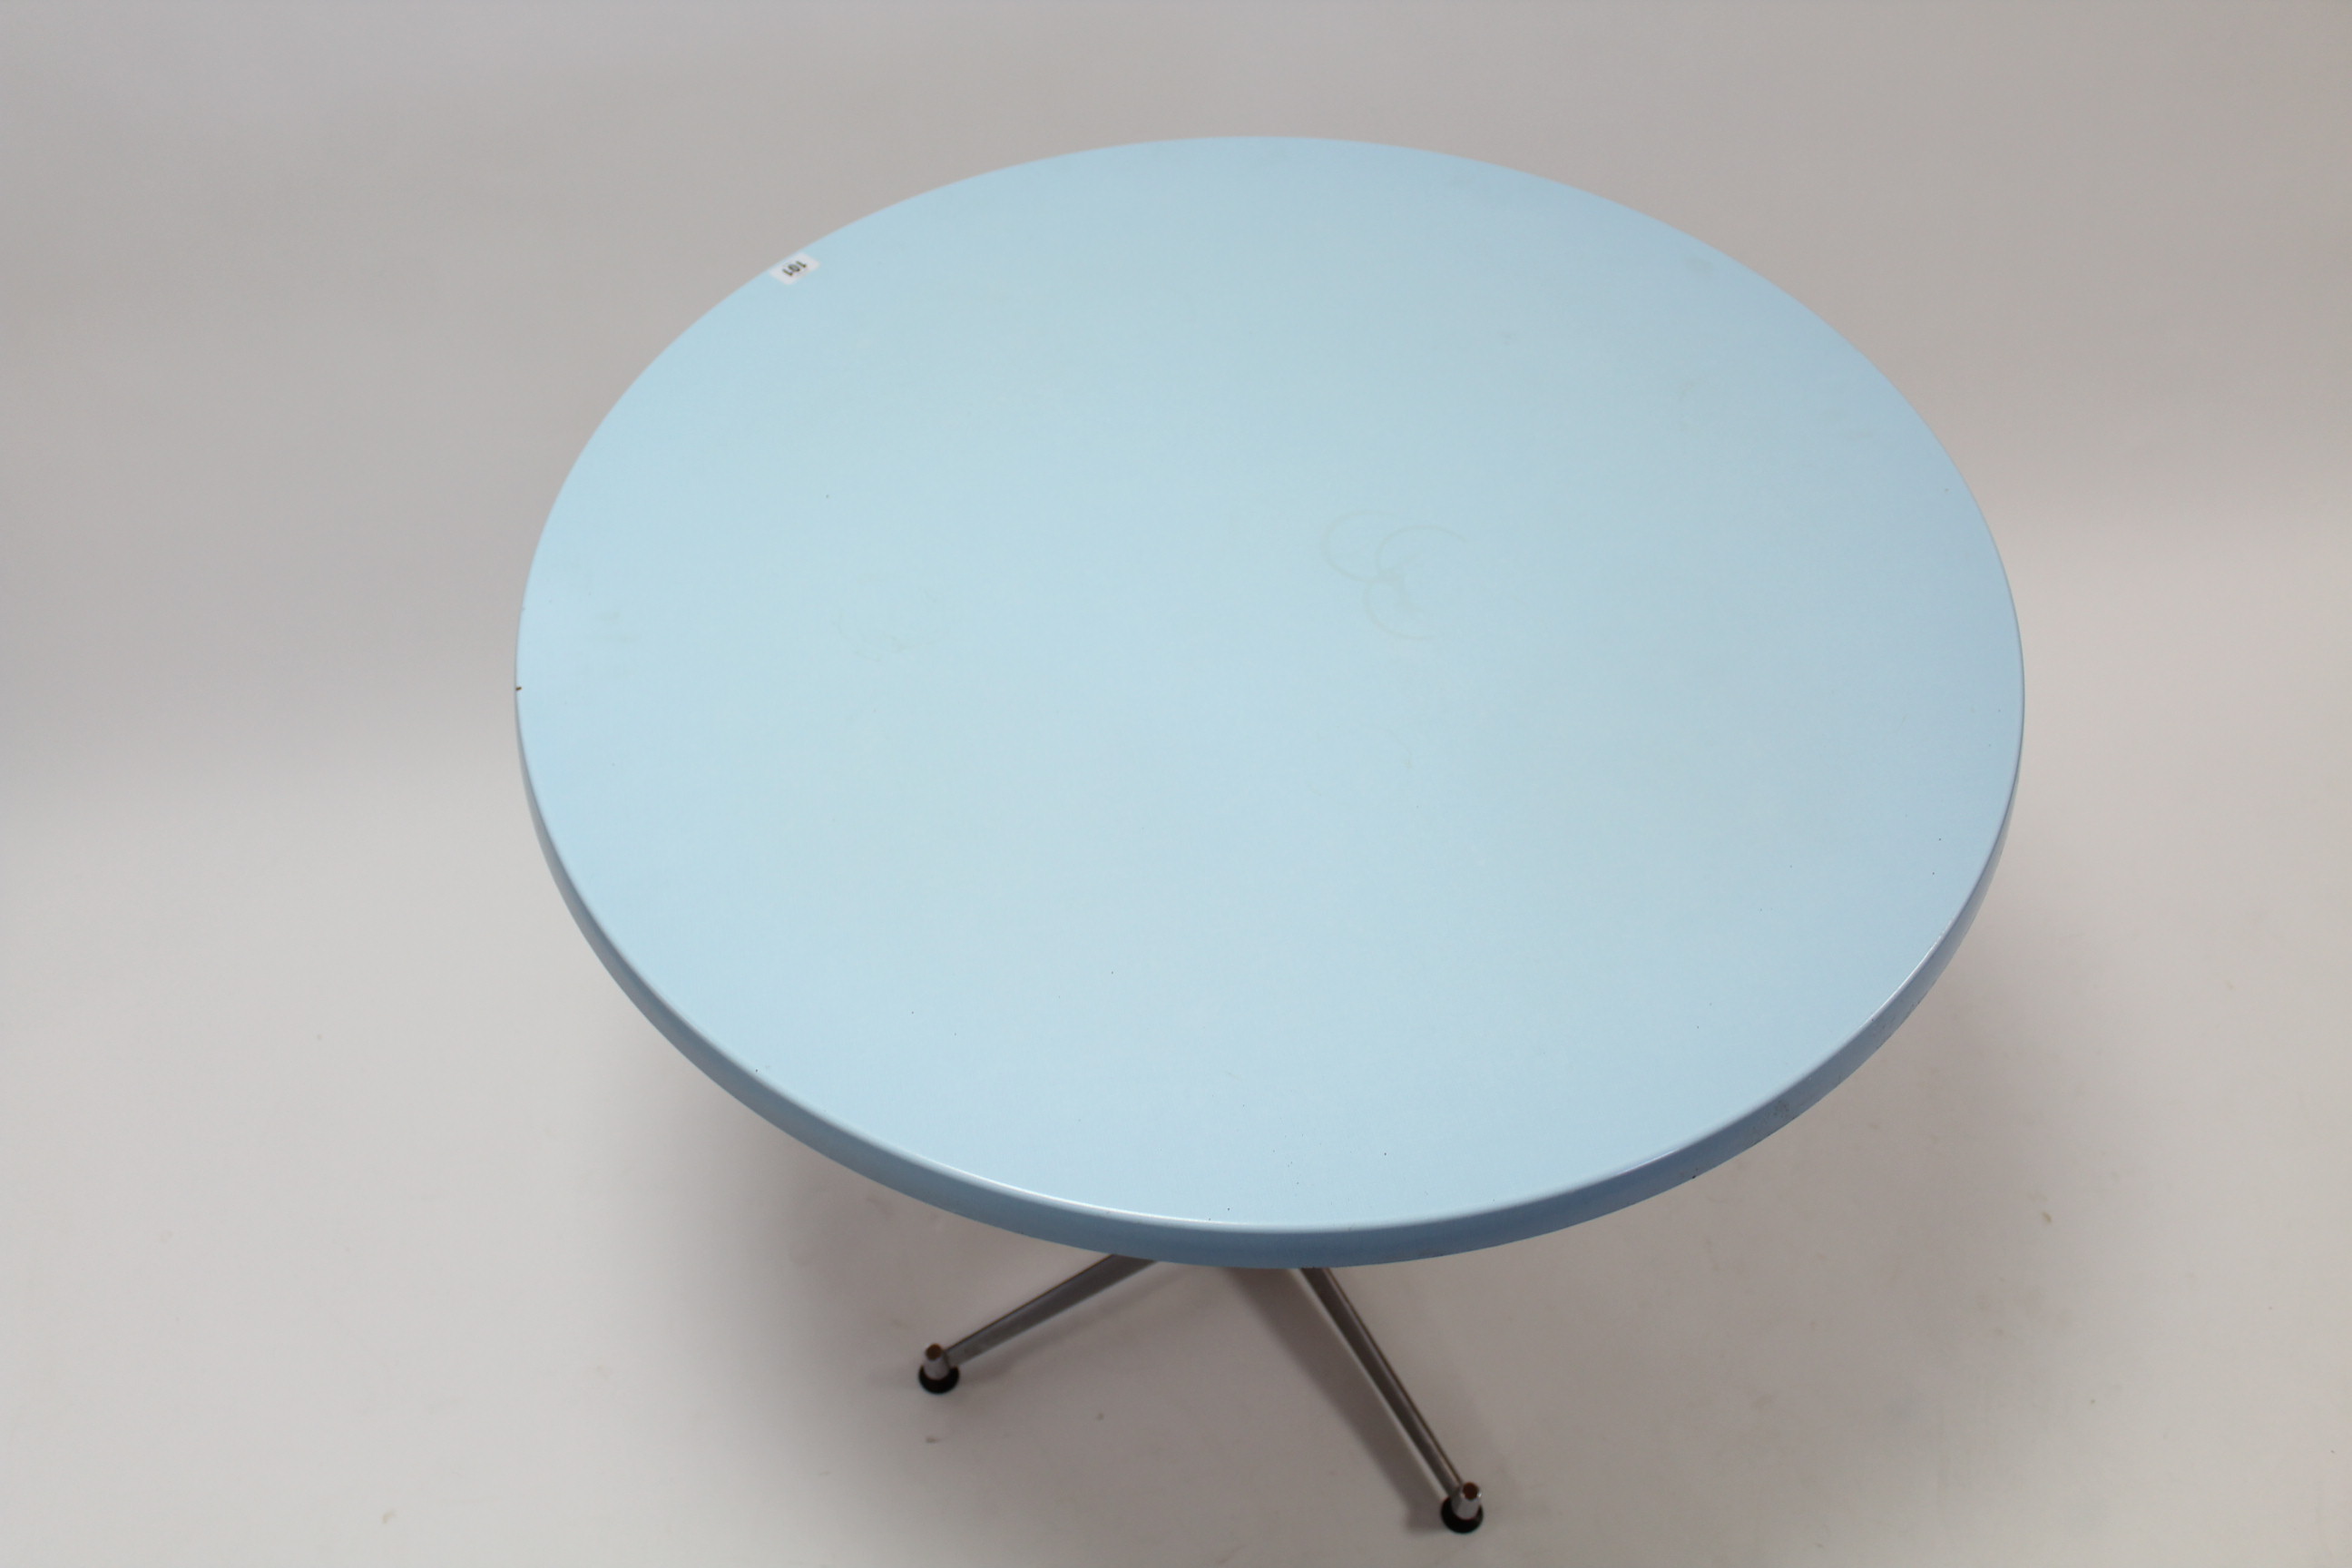 A cream-finish & natural chrome kitchen table with pale blue laminate circular top, 35½” diam. - Image 2 of 5